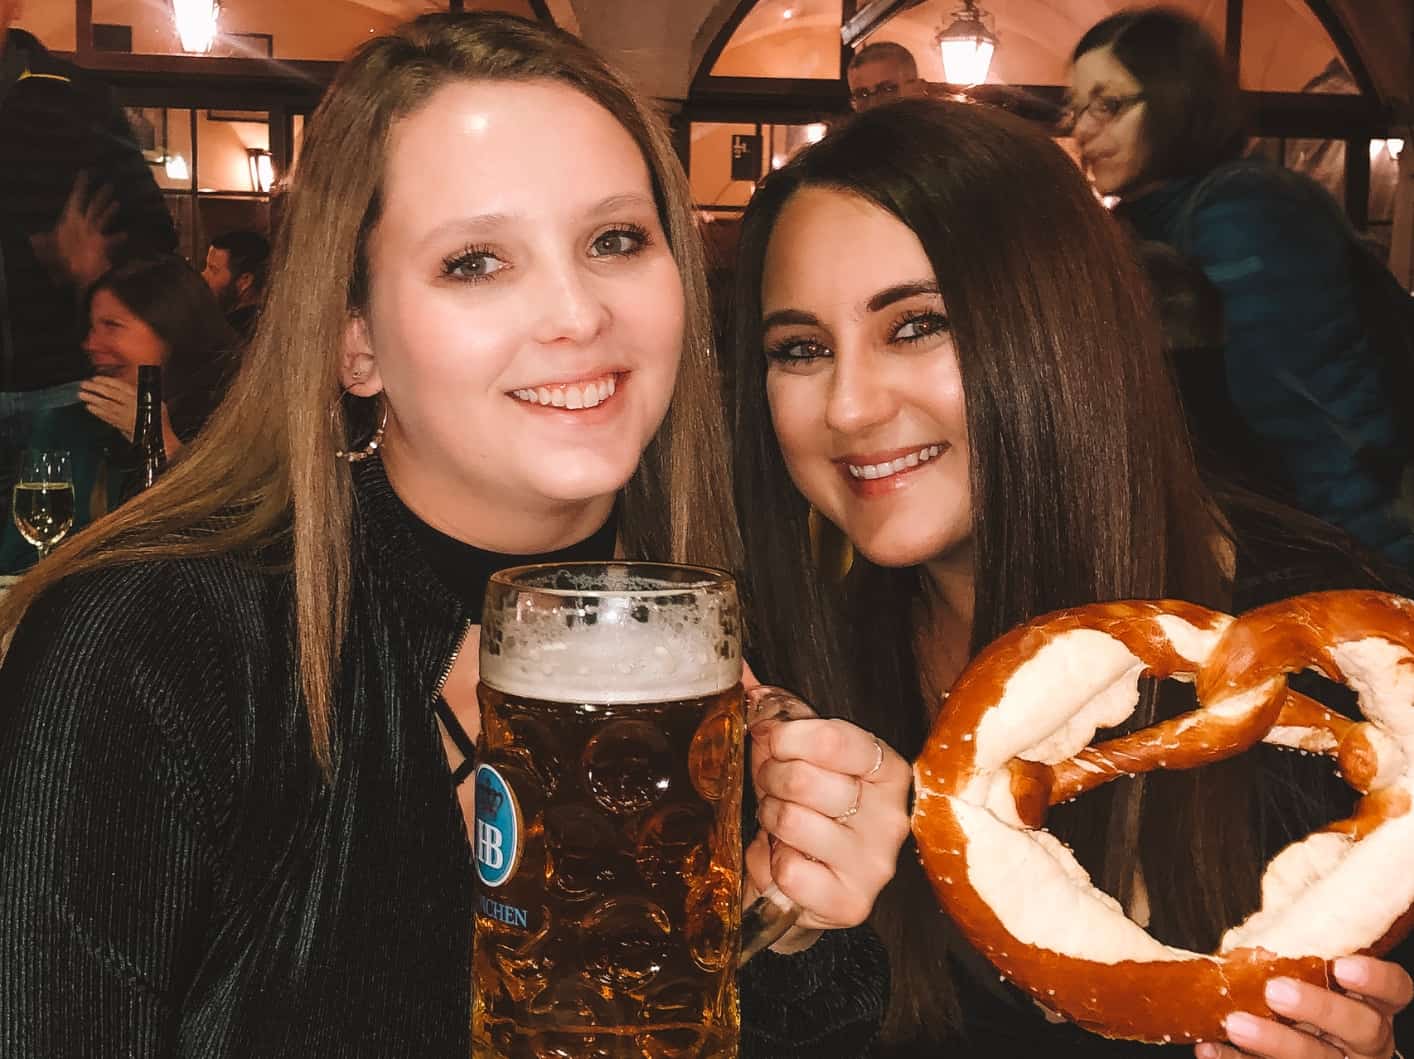 My bestie and I drinking beer and eating pretzels at Hofbrauhaus in Munich 